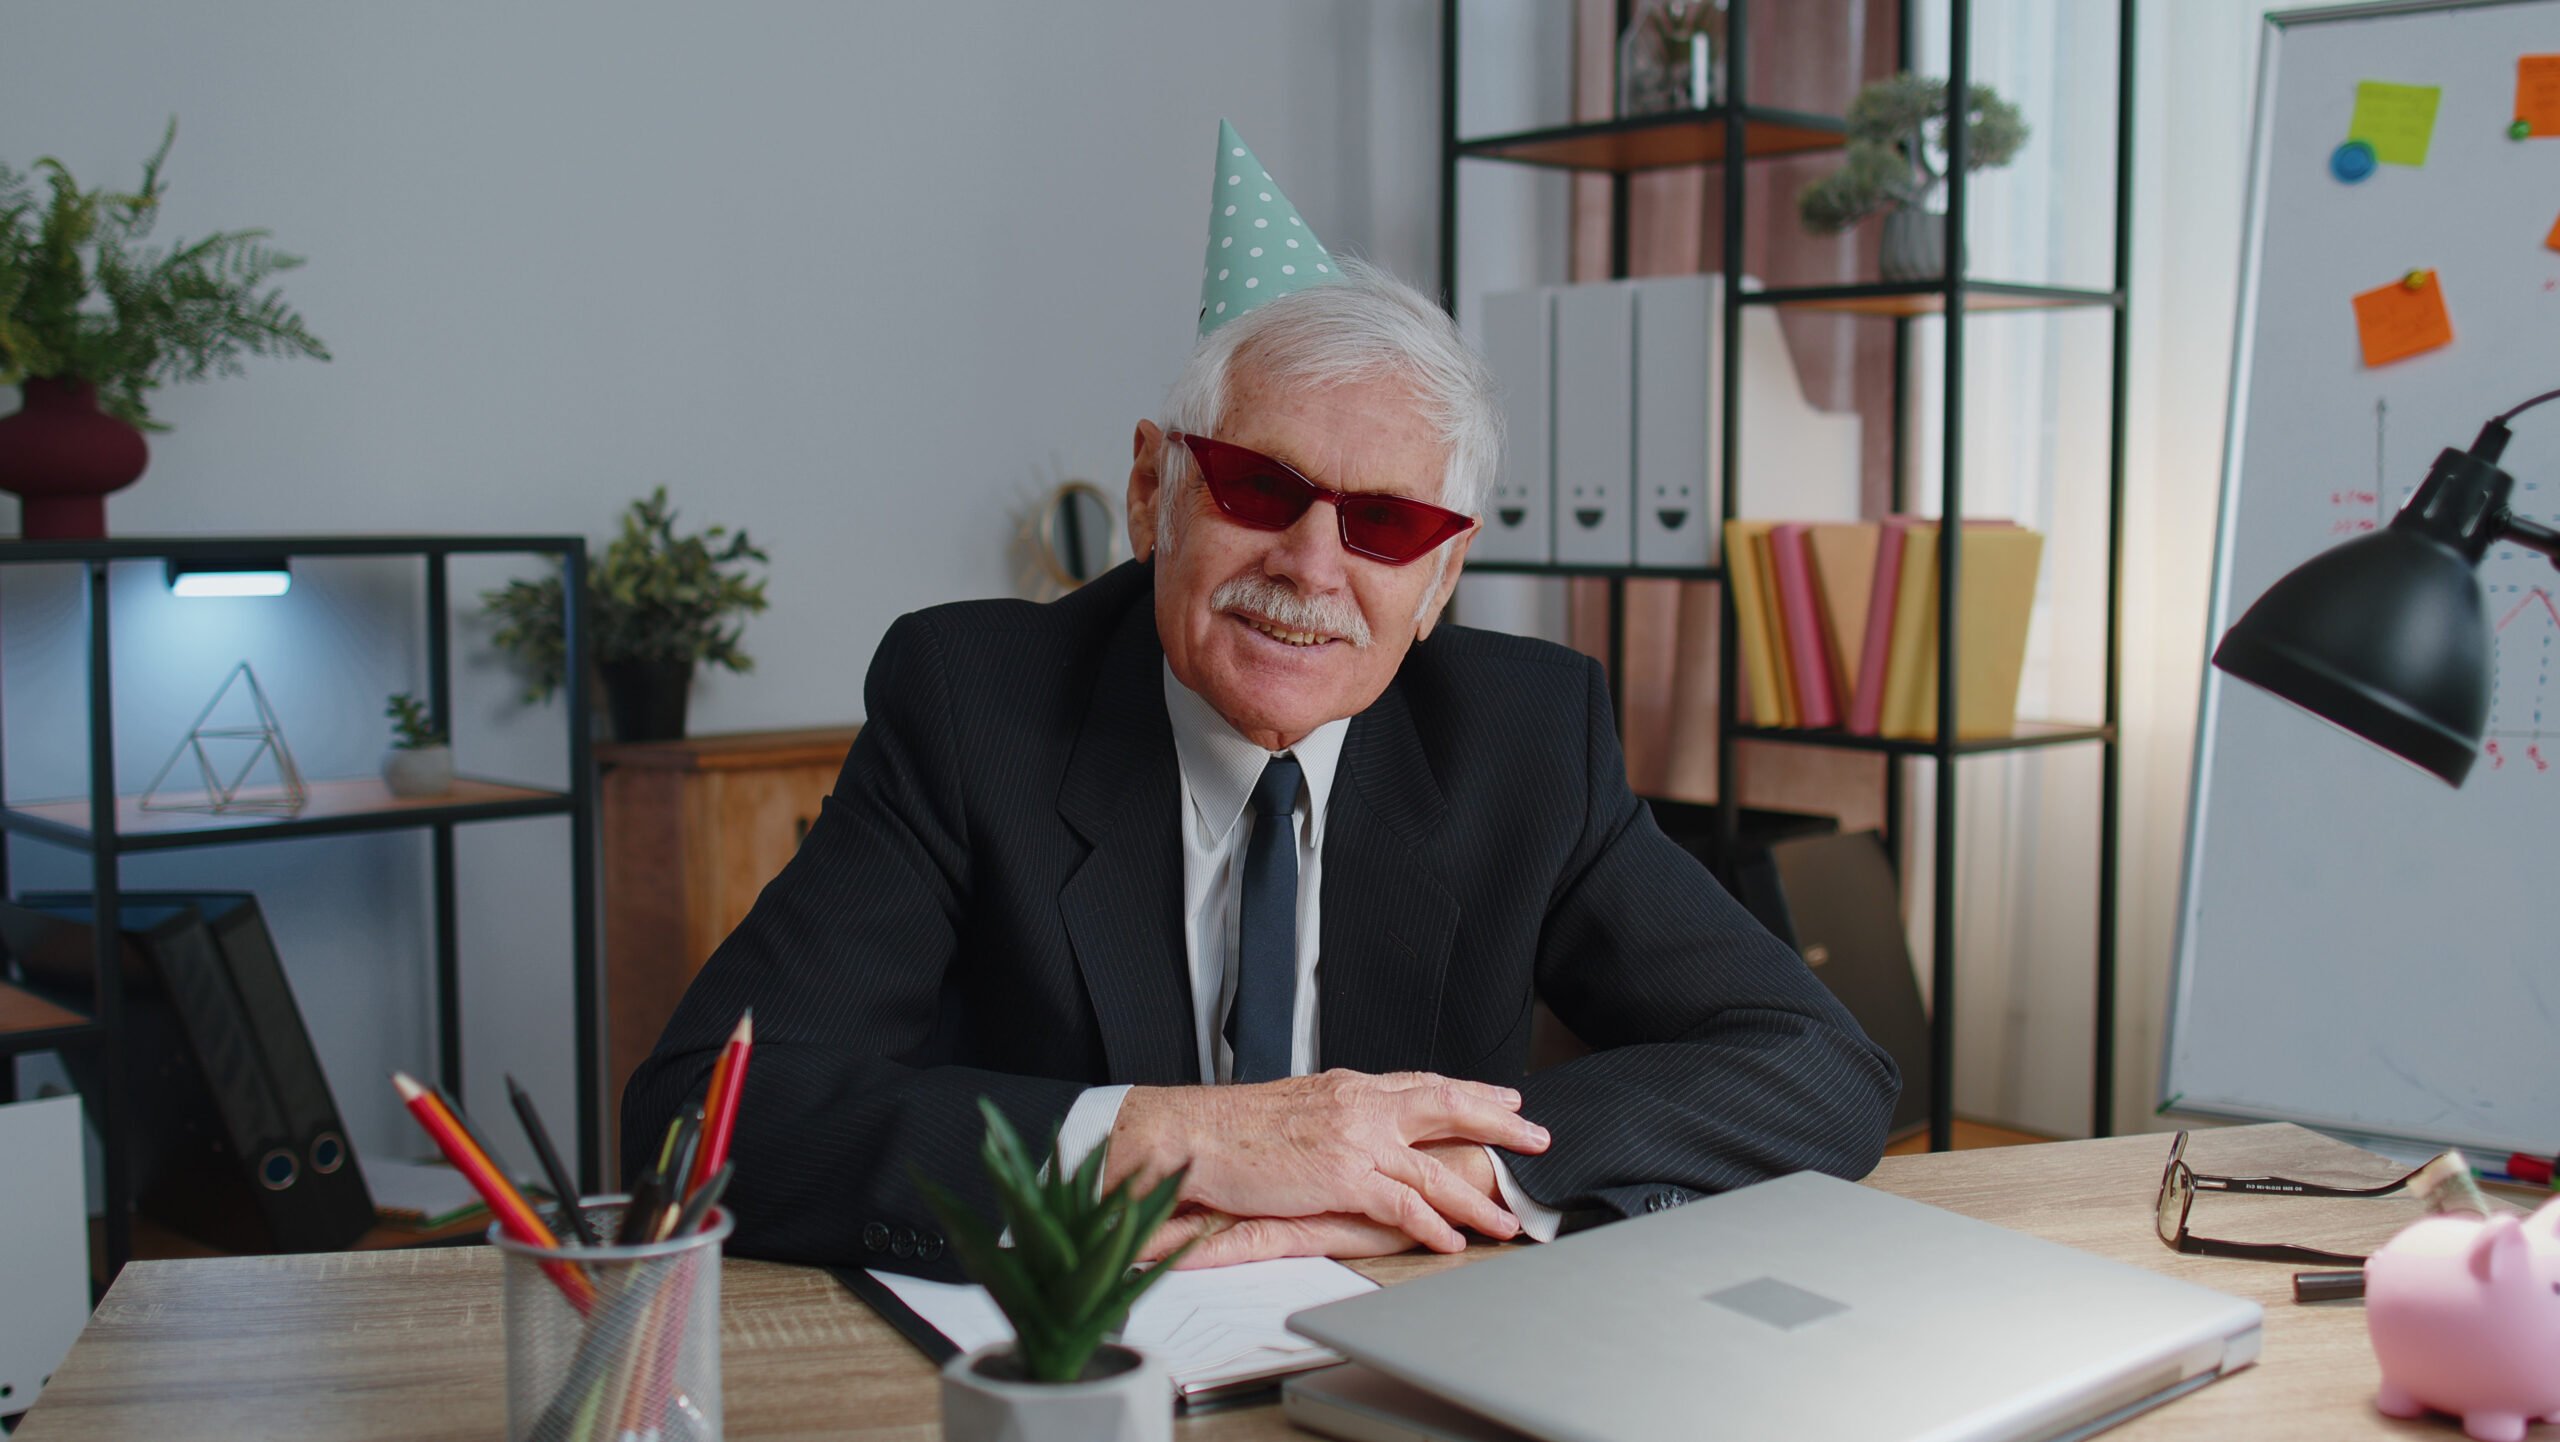 Cool CEO in glasses and party hat celebrating office birthday